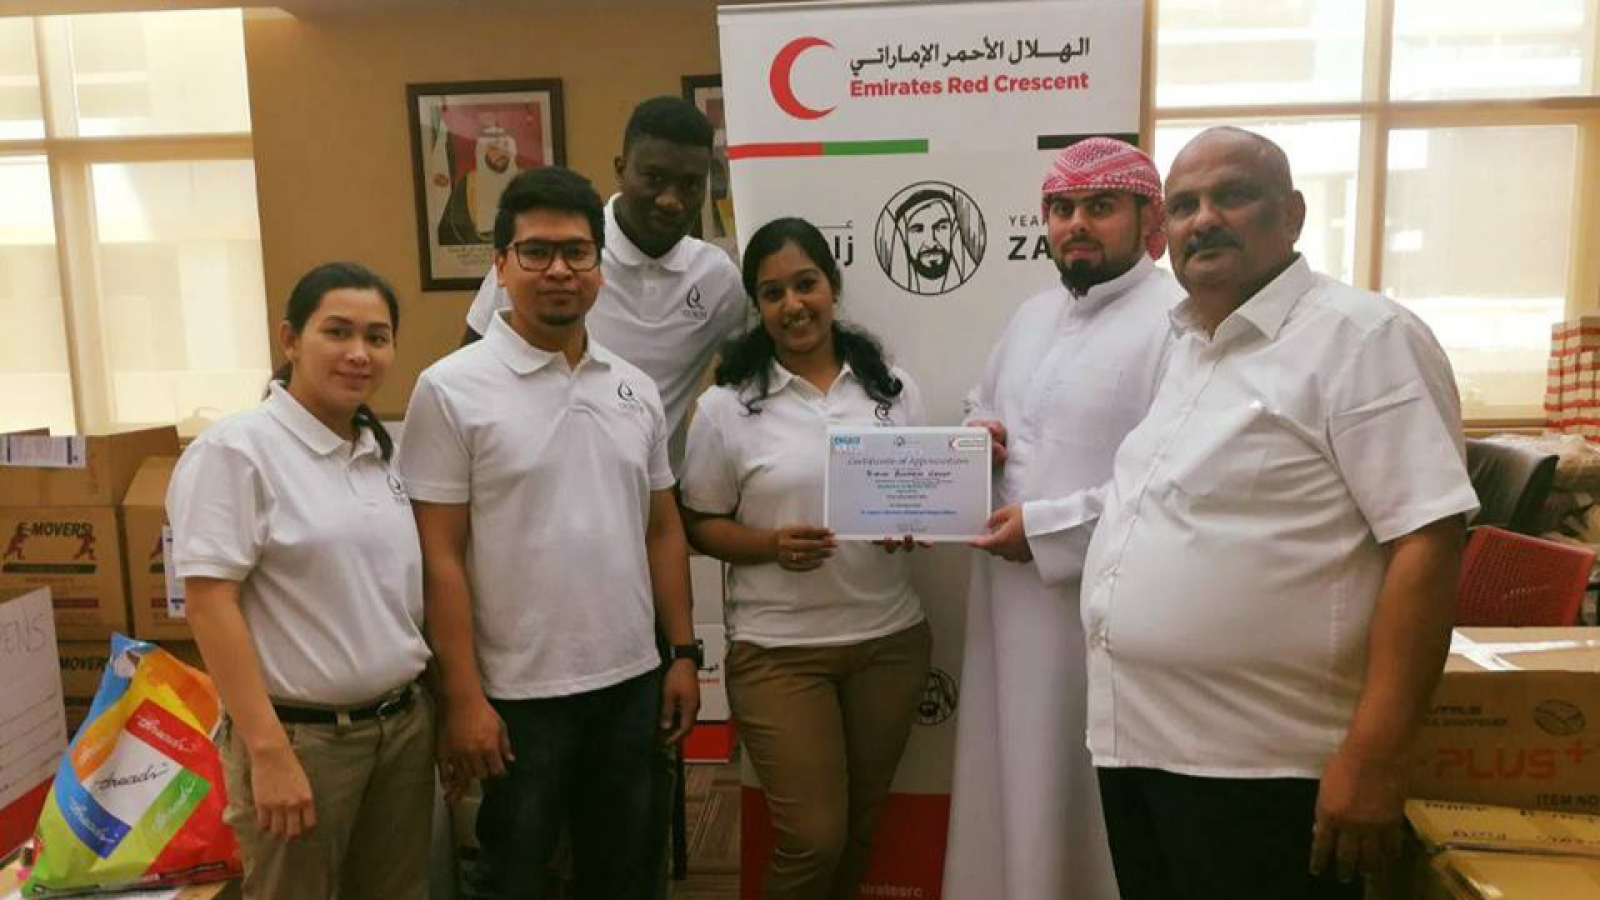 QBG participated in the Stationery Collection Drive 2018